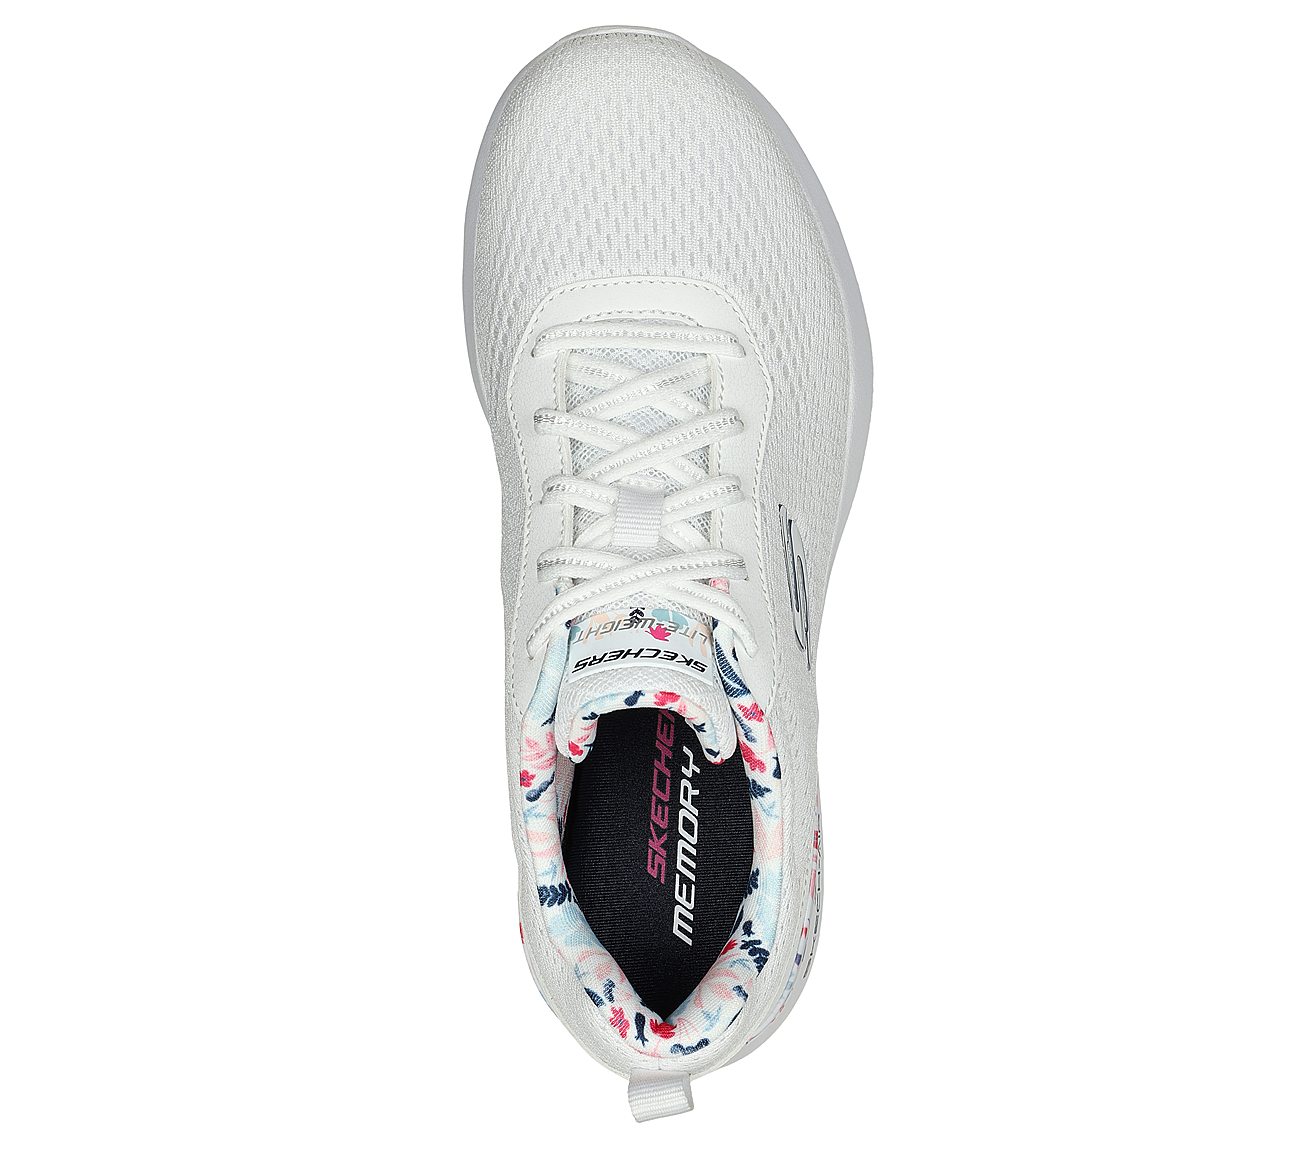 SKECH-AIR DYNAMIGHT-LAID OUT, WHITE/MULTI Footwear Top View